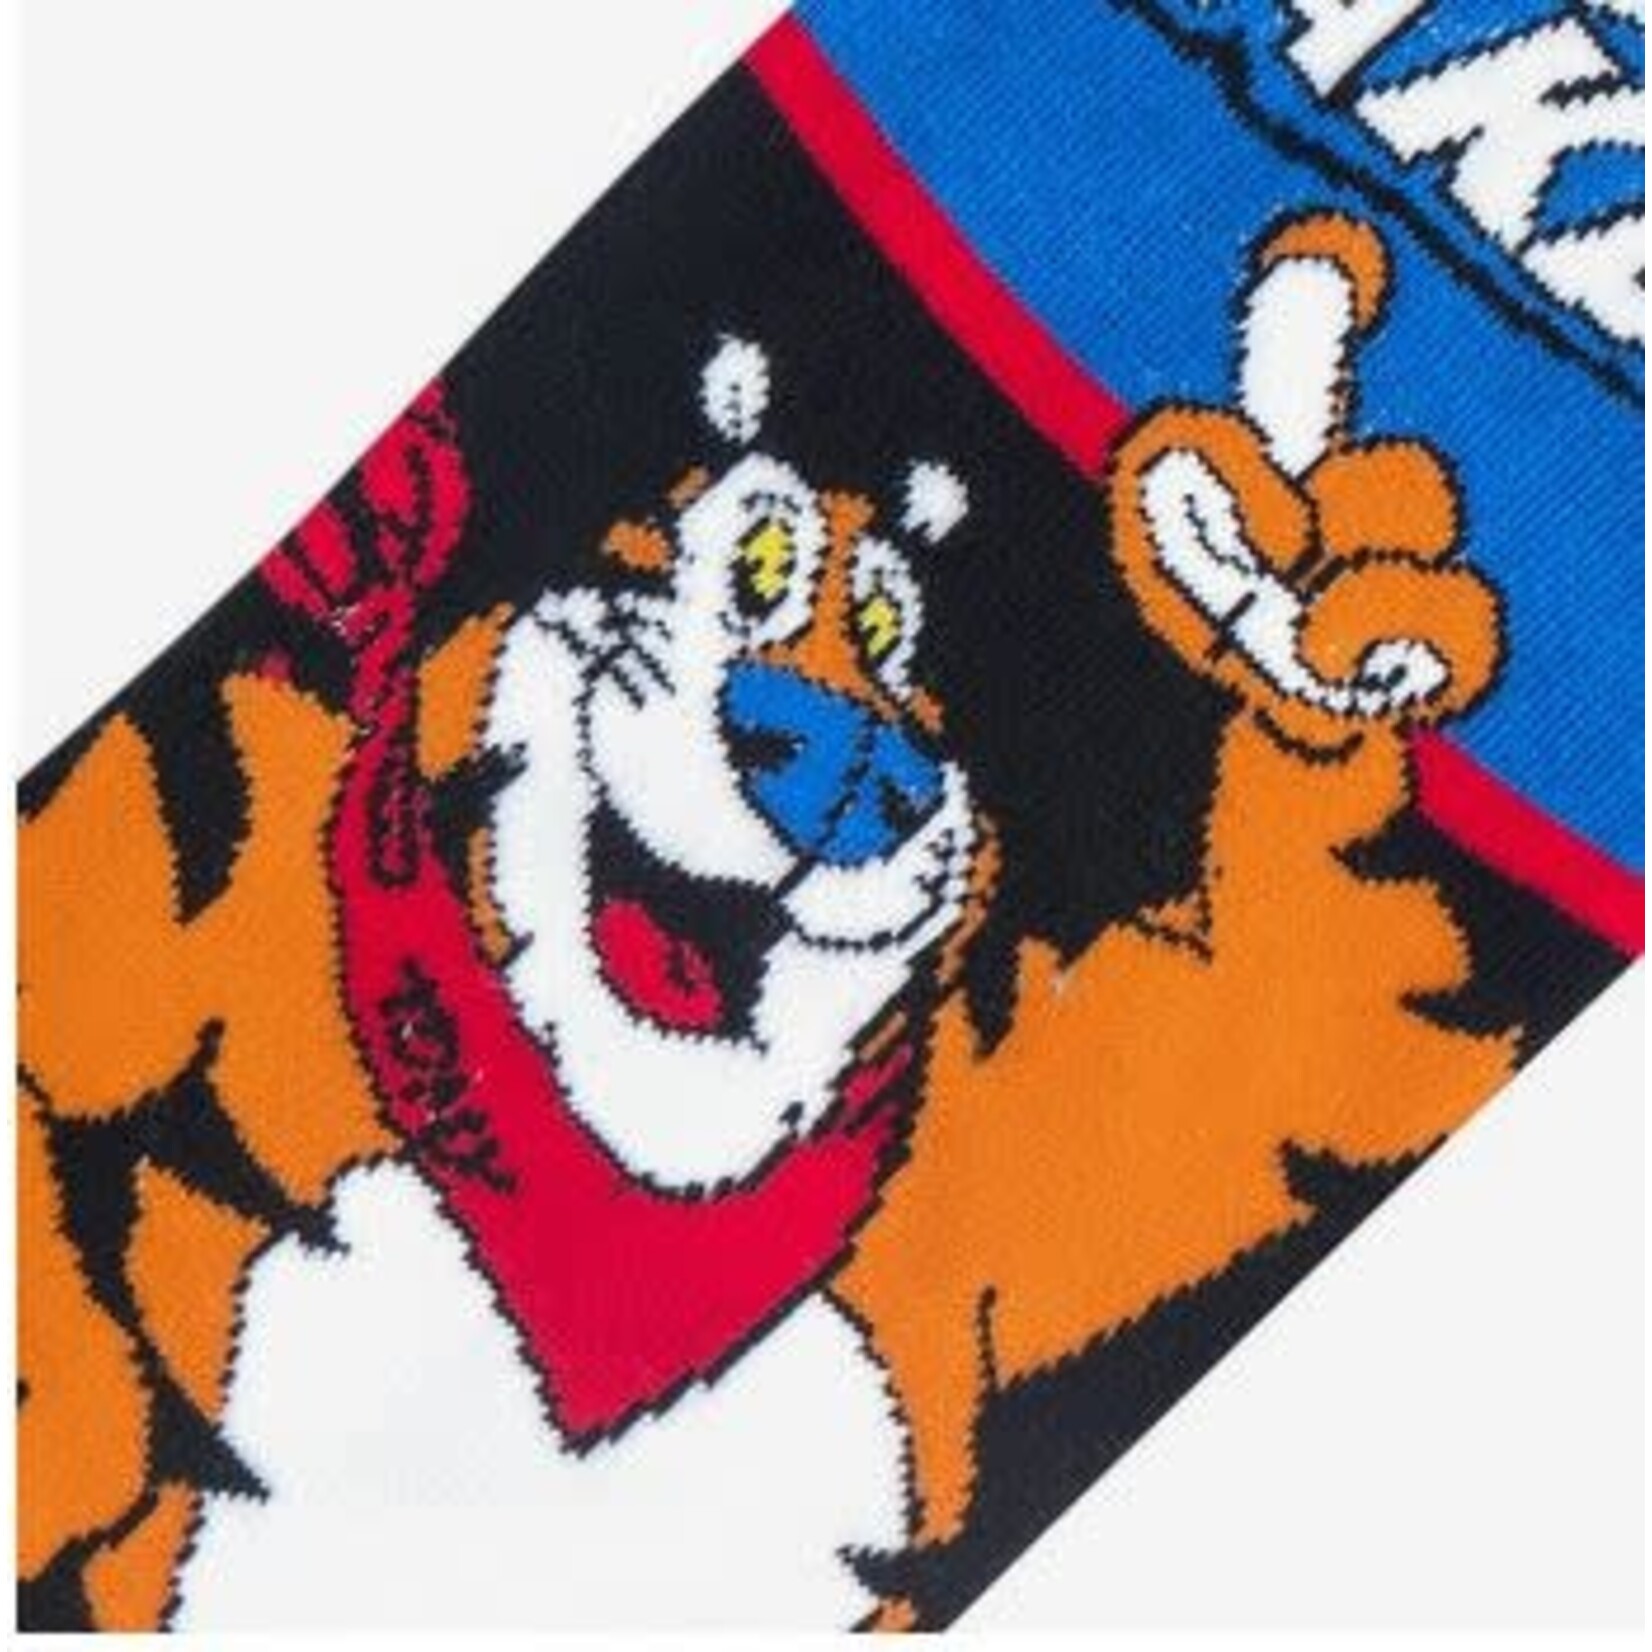 ODD SOX FROSTED FLAKES CREW SOCKS